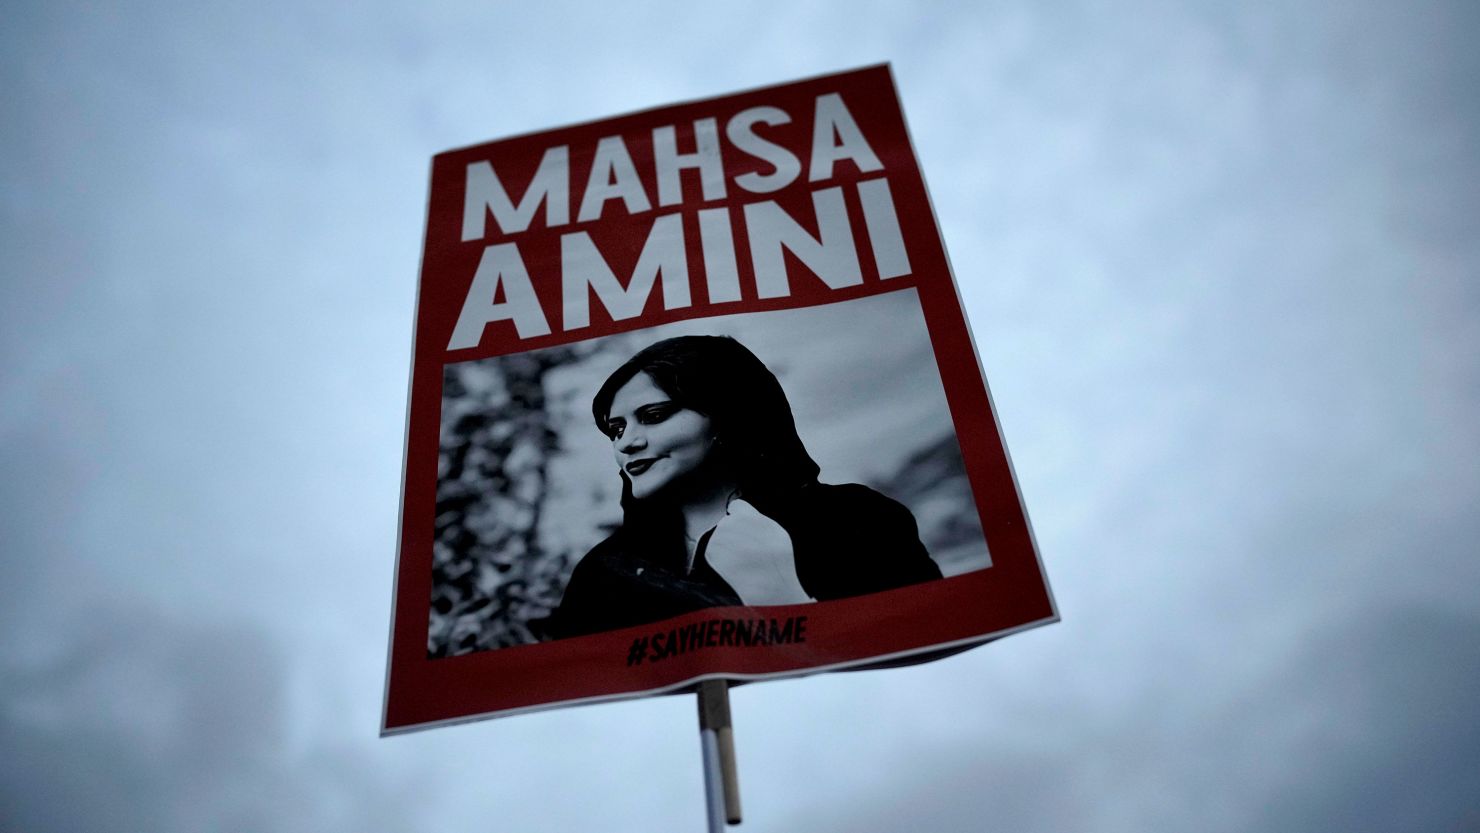 A placard shows a picture of Iranian woman Mahsa Amini during a protest against her death, in Berlin, Germany, on Sept. 28, 2022.